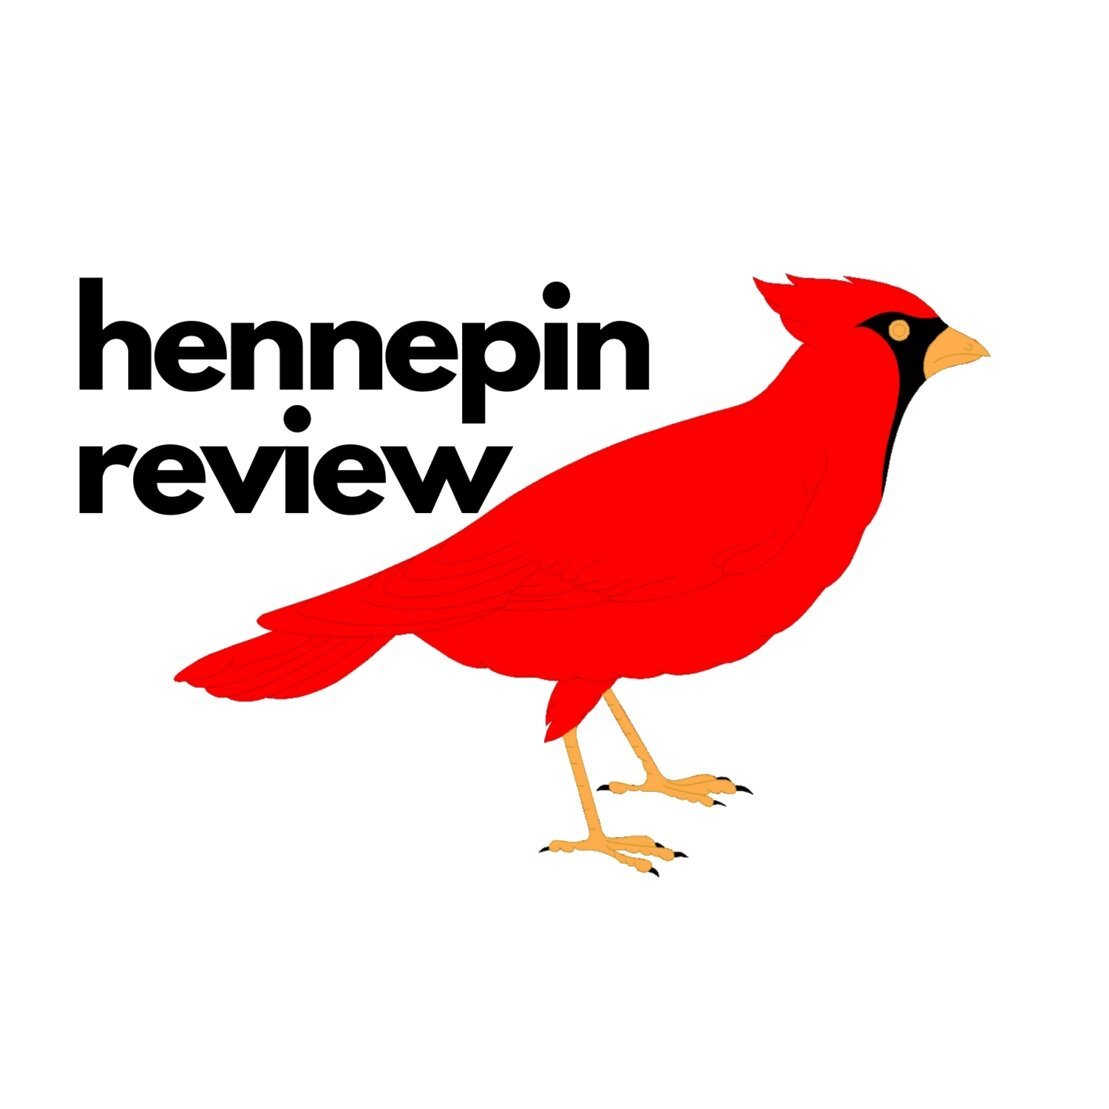 The Hennepin Review